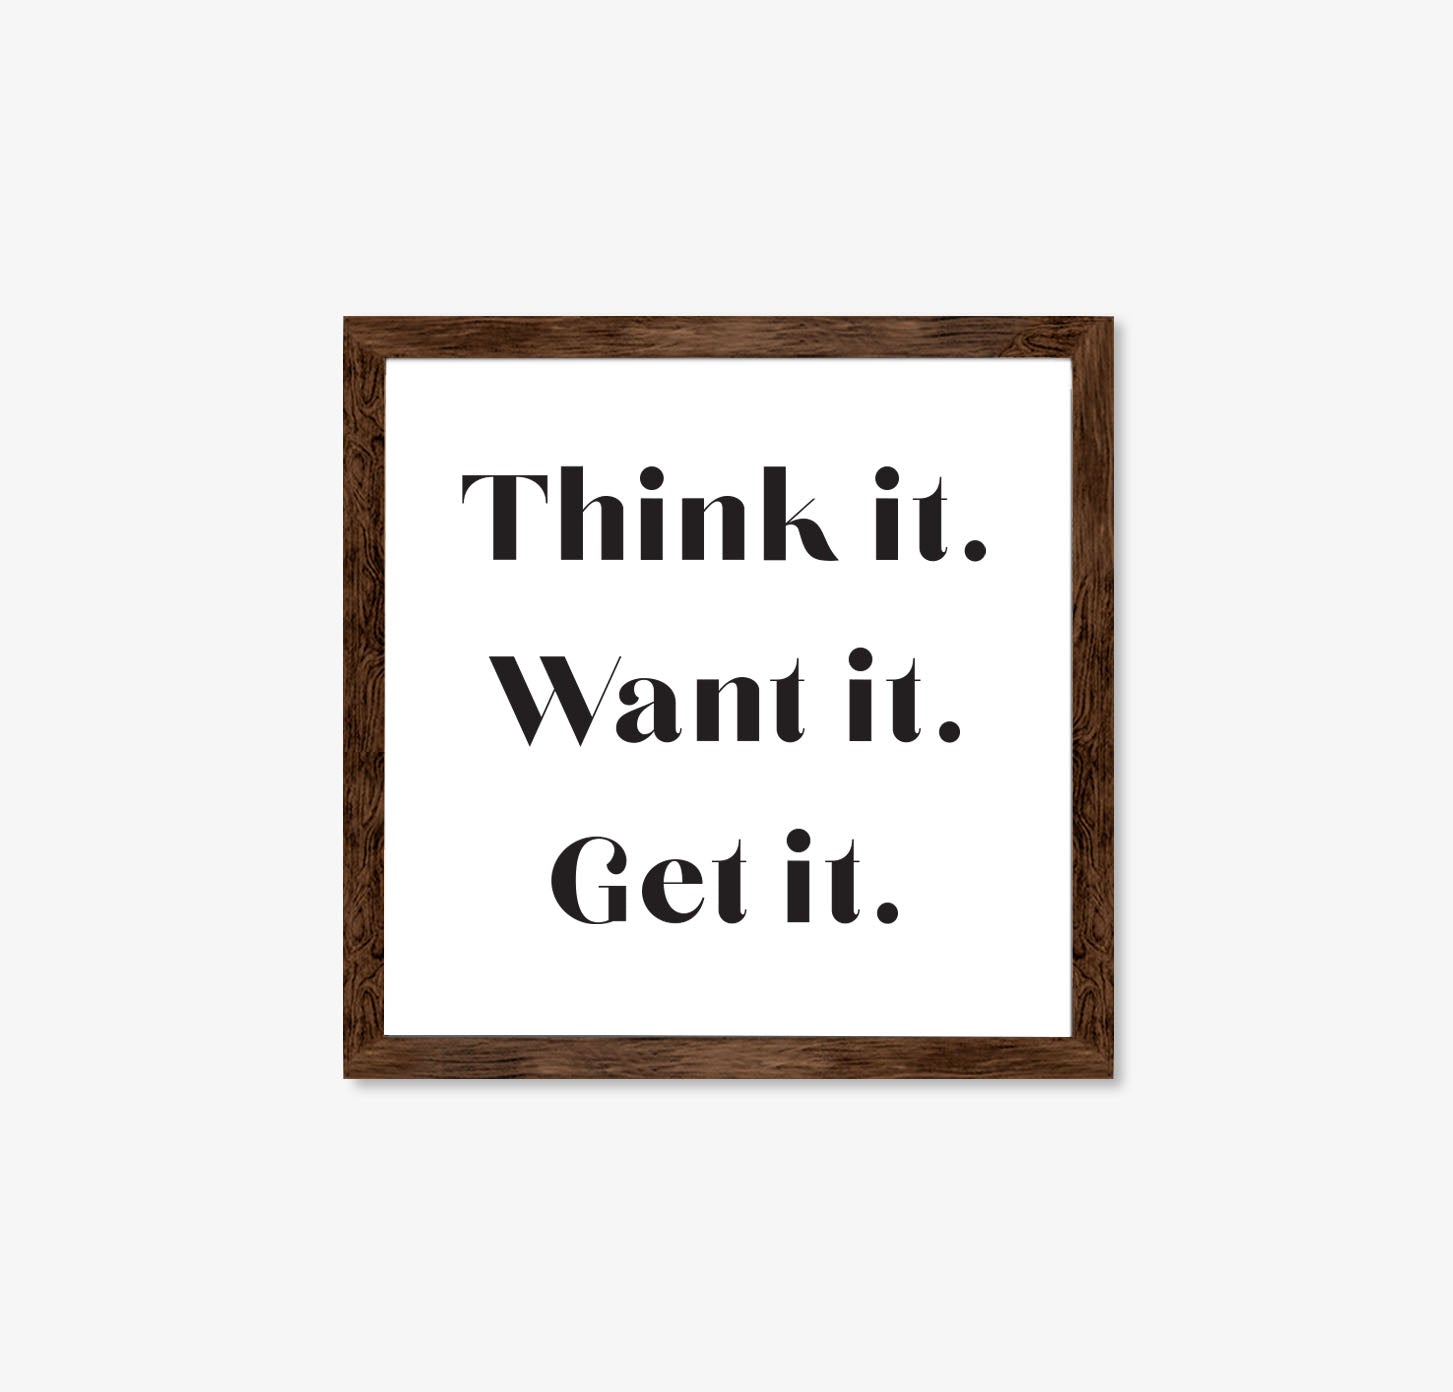 Think It. Want It. Get It - Wood Framed Wall Decor Sign - TheDecorCollection